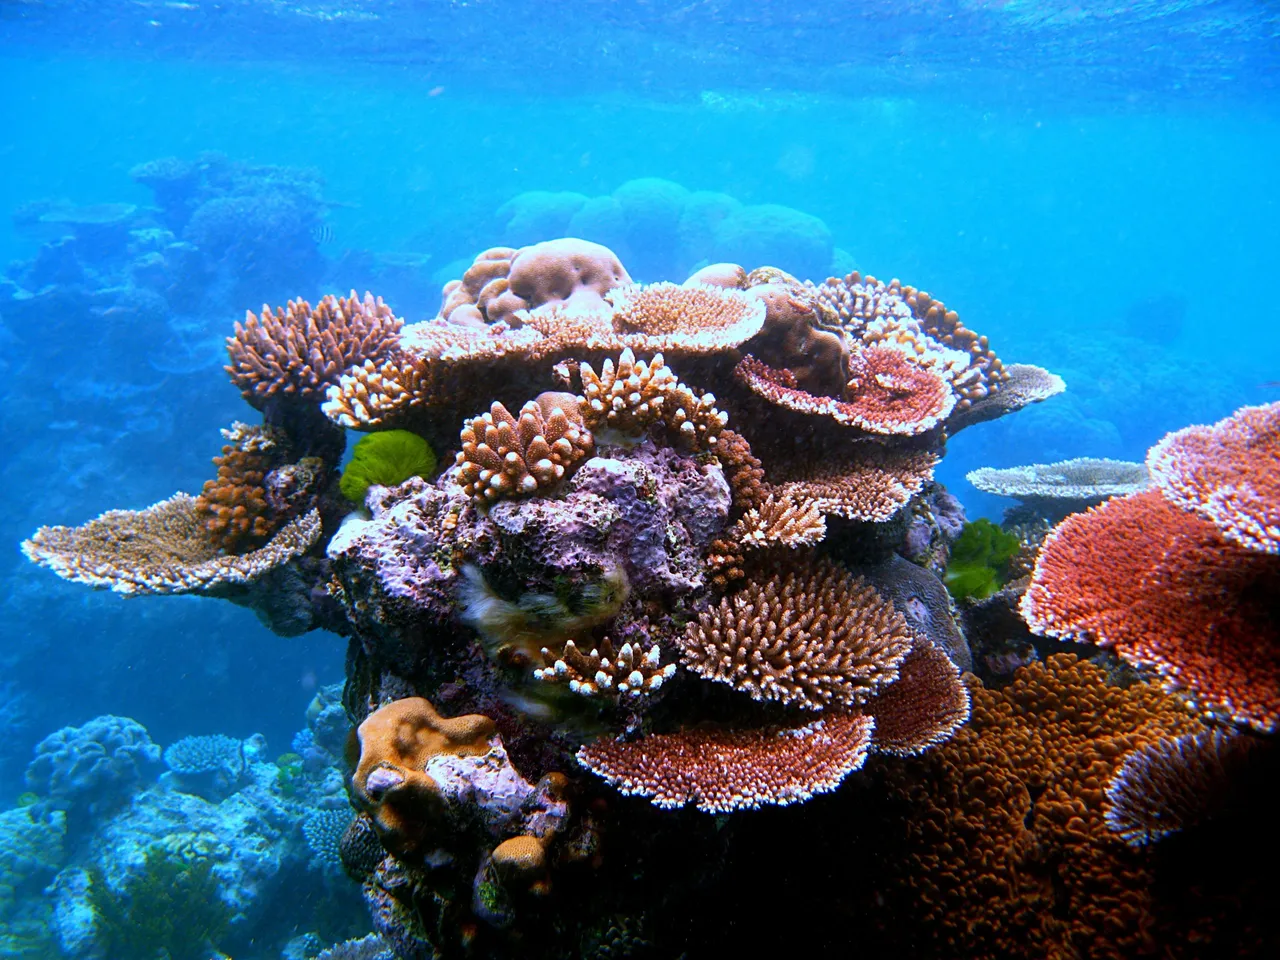 Restoring reefs killed by climate change may simply put corals ‘back out to die’ – here’s how we can improve their chances